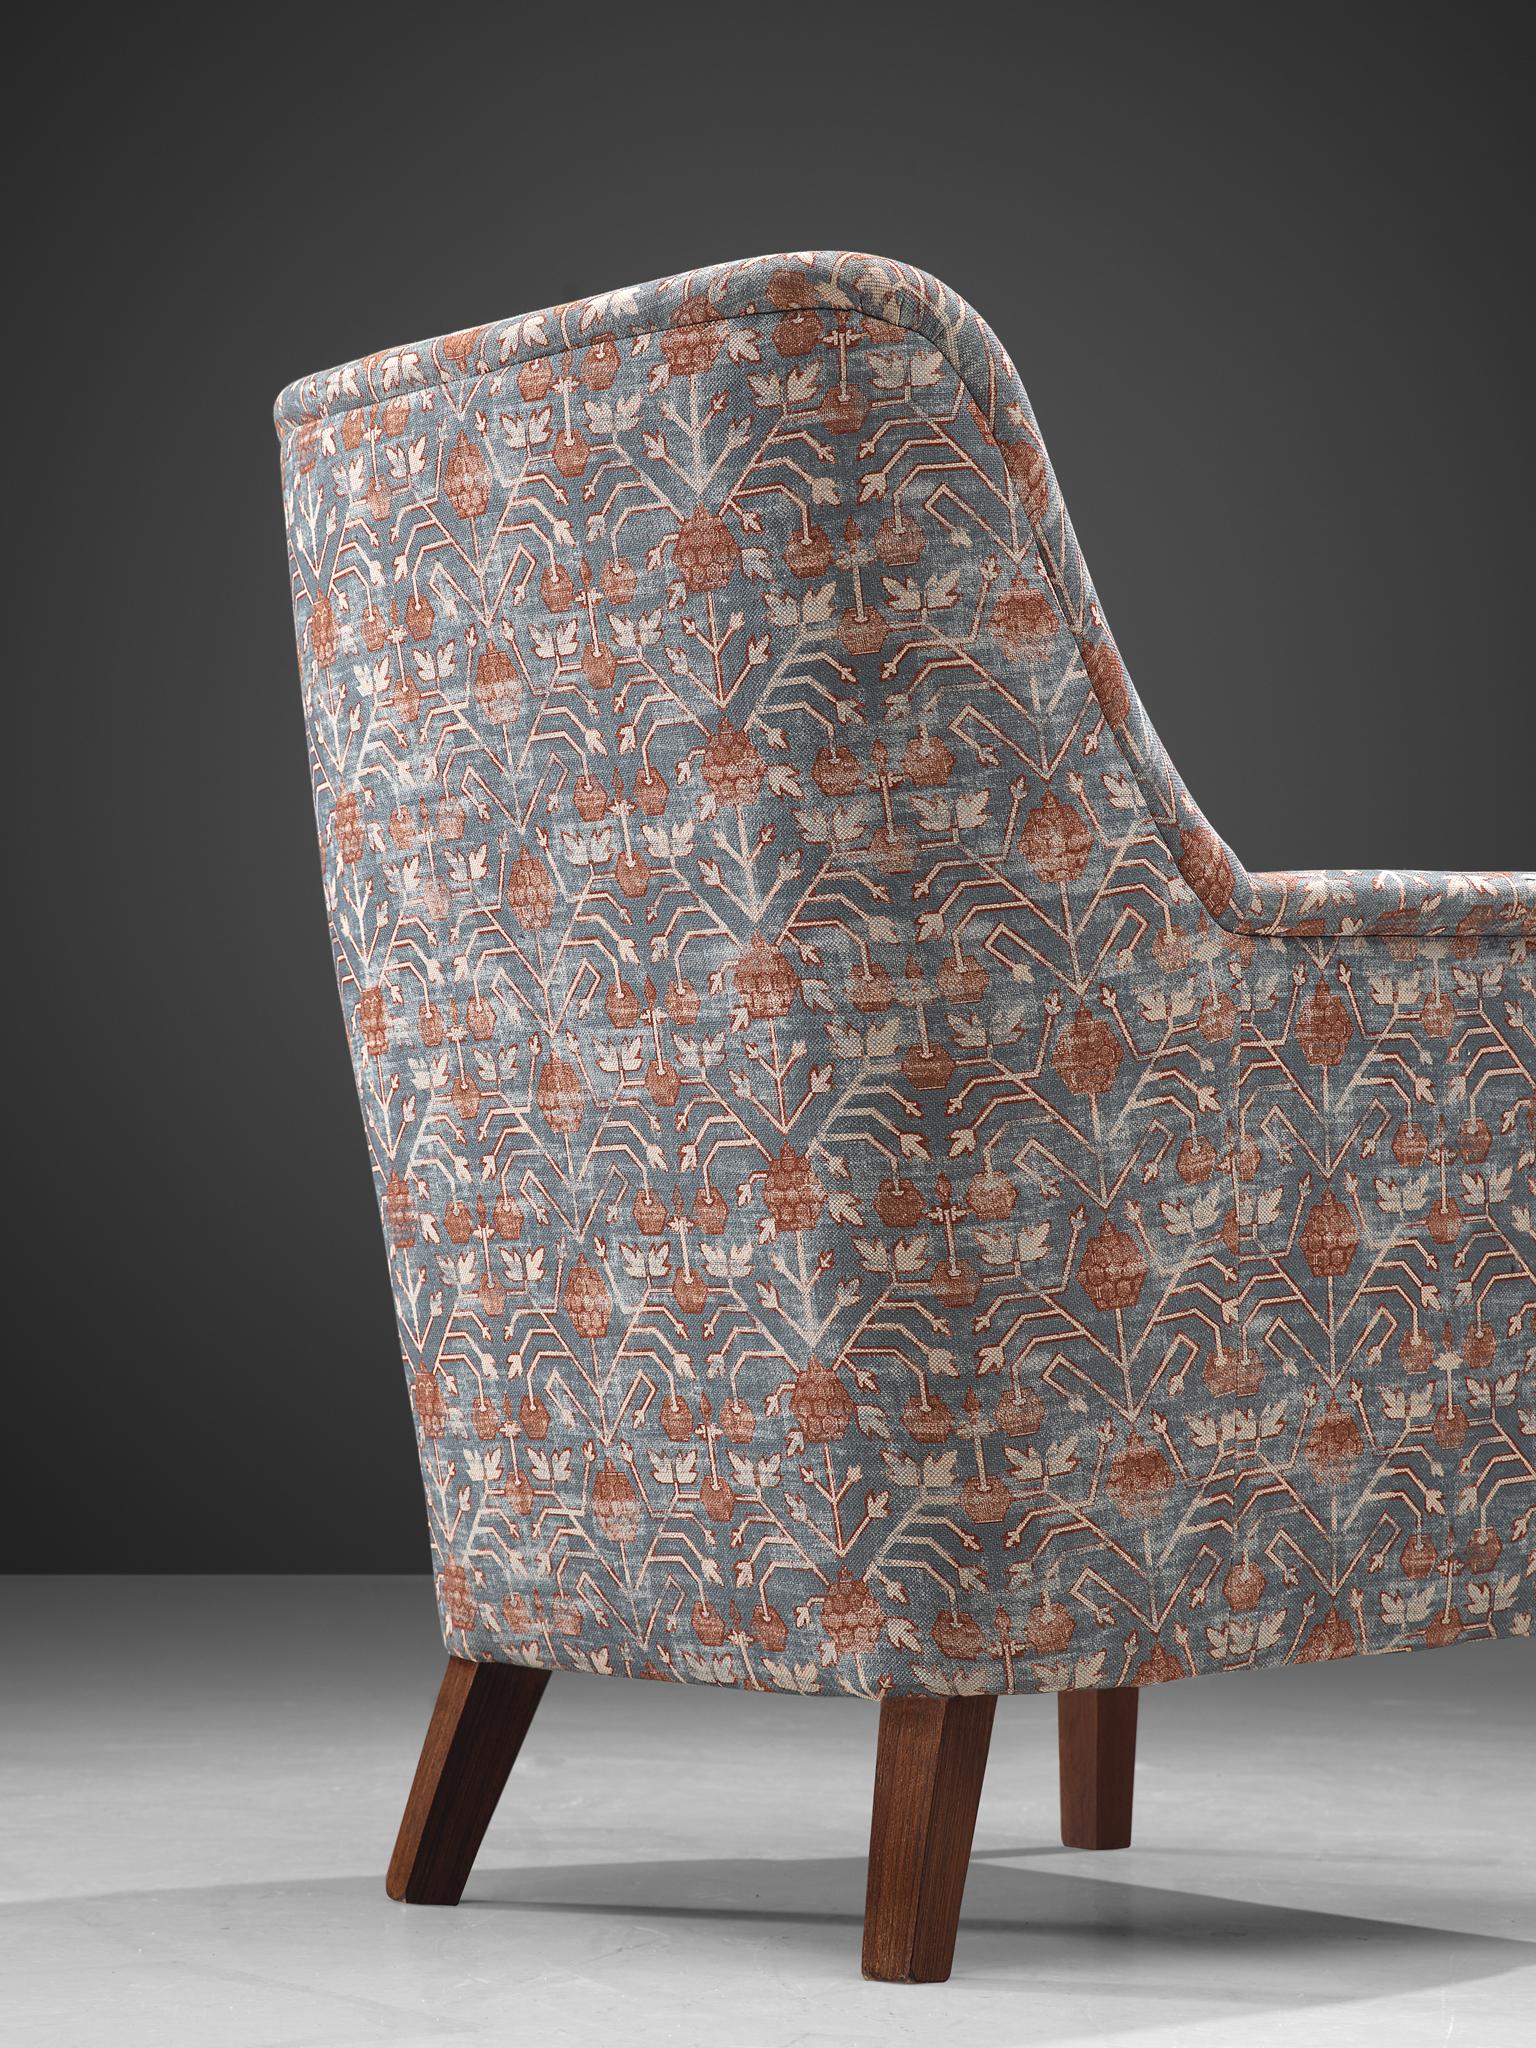 Mid-20th Century Danish Lounge Chair with ZAK+FOX 'Fantasma' Collection 2020 Upholstery